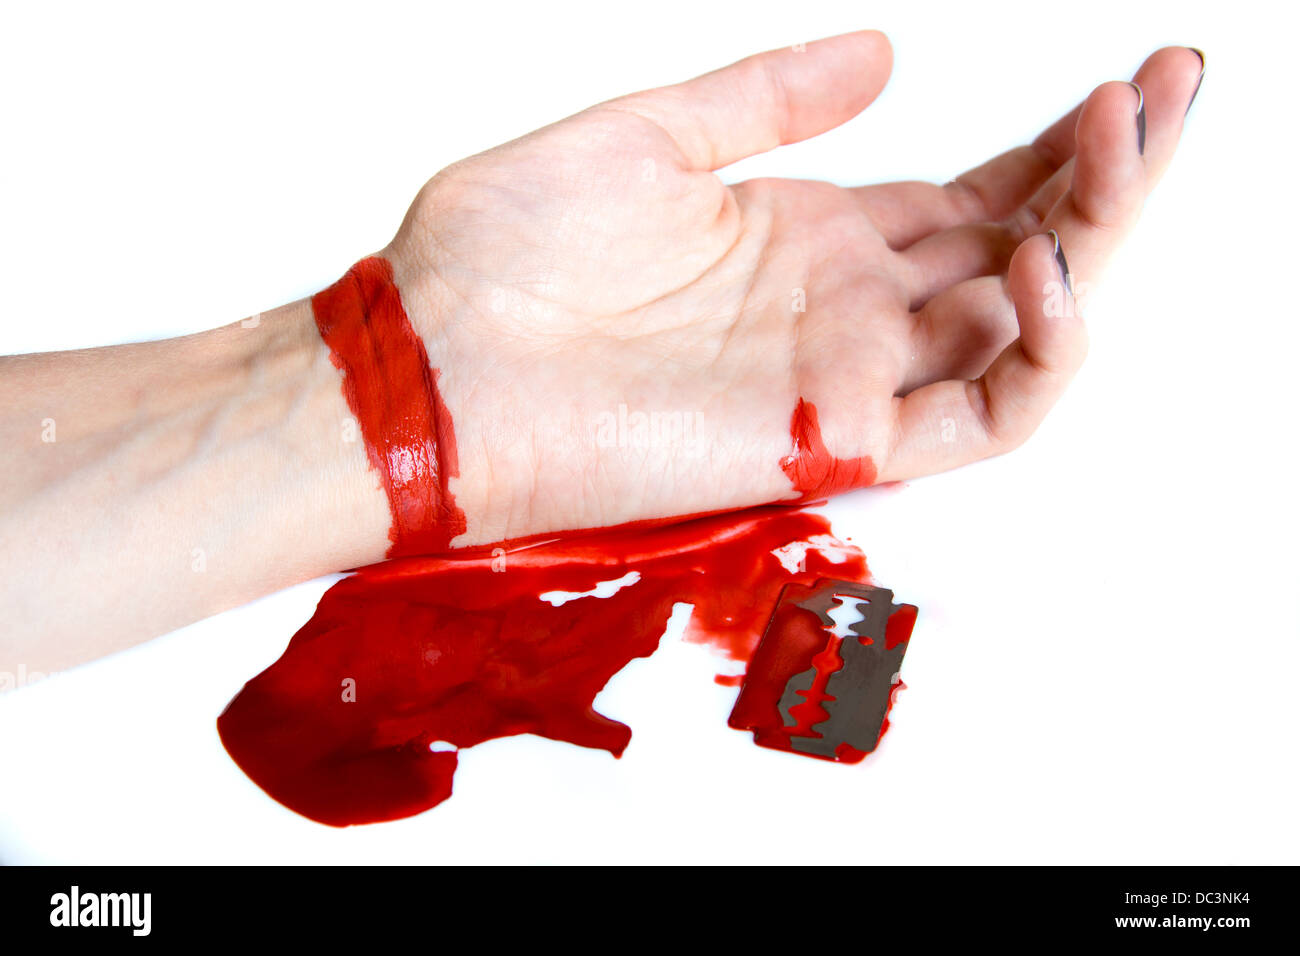 Knife Blood Hand High Resolution Stock Photography And Images Alamy